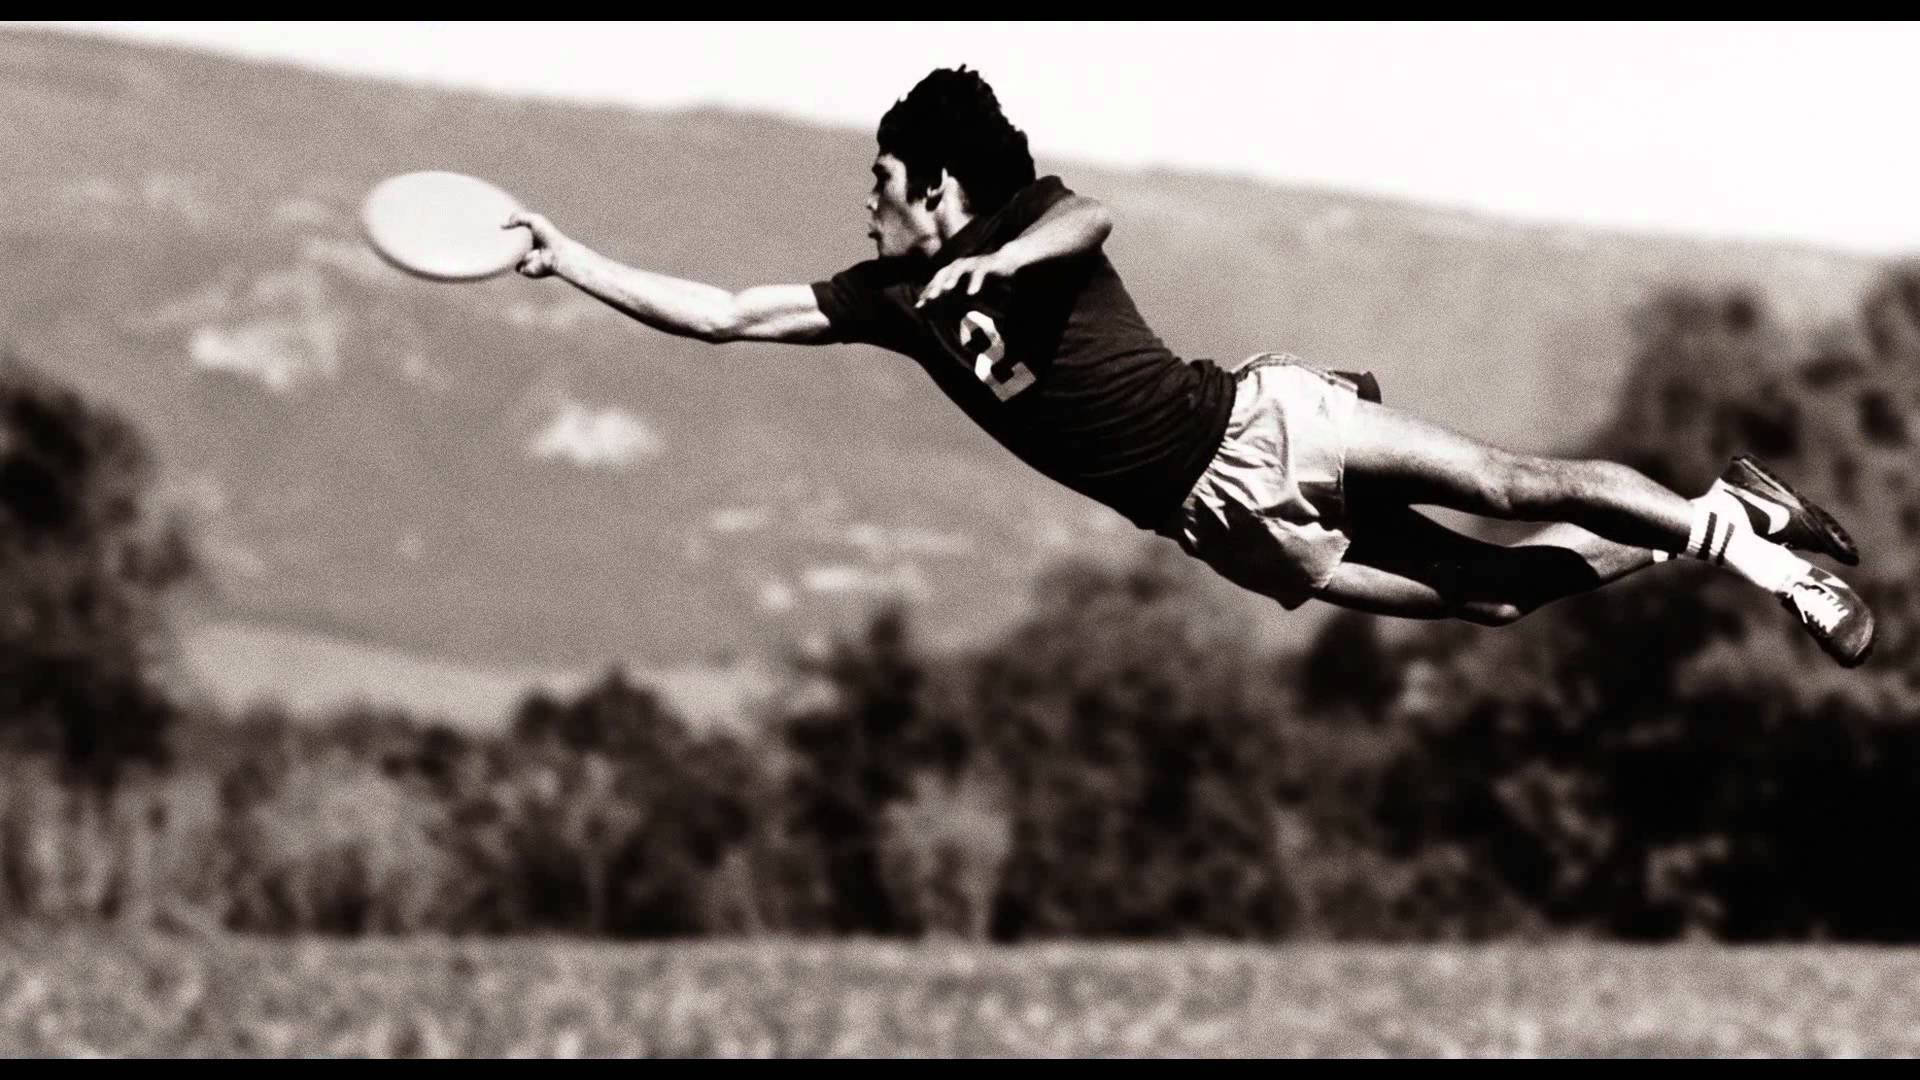 Top 999+ Ultimate Frisbee Wallpaper Full HD, 4K✅Free to Use